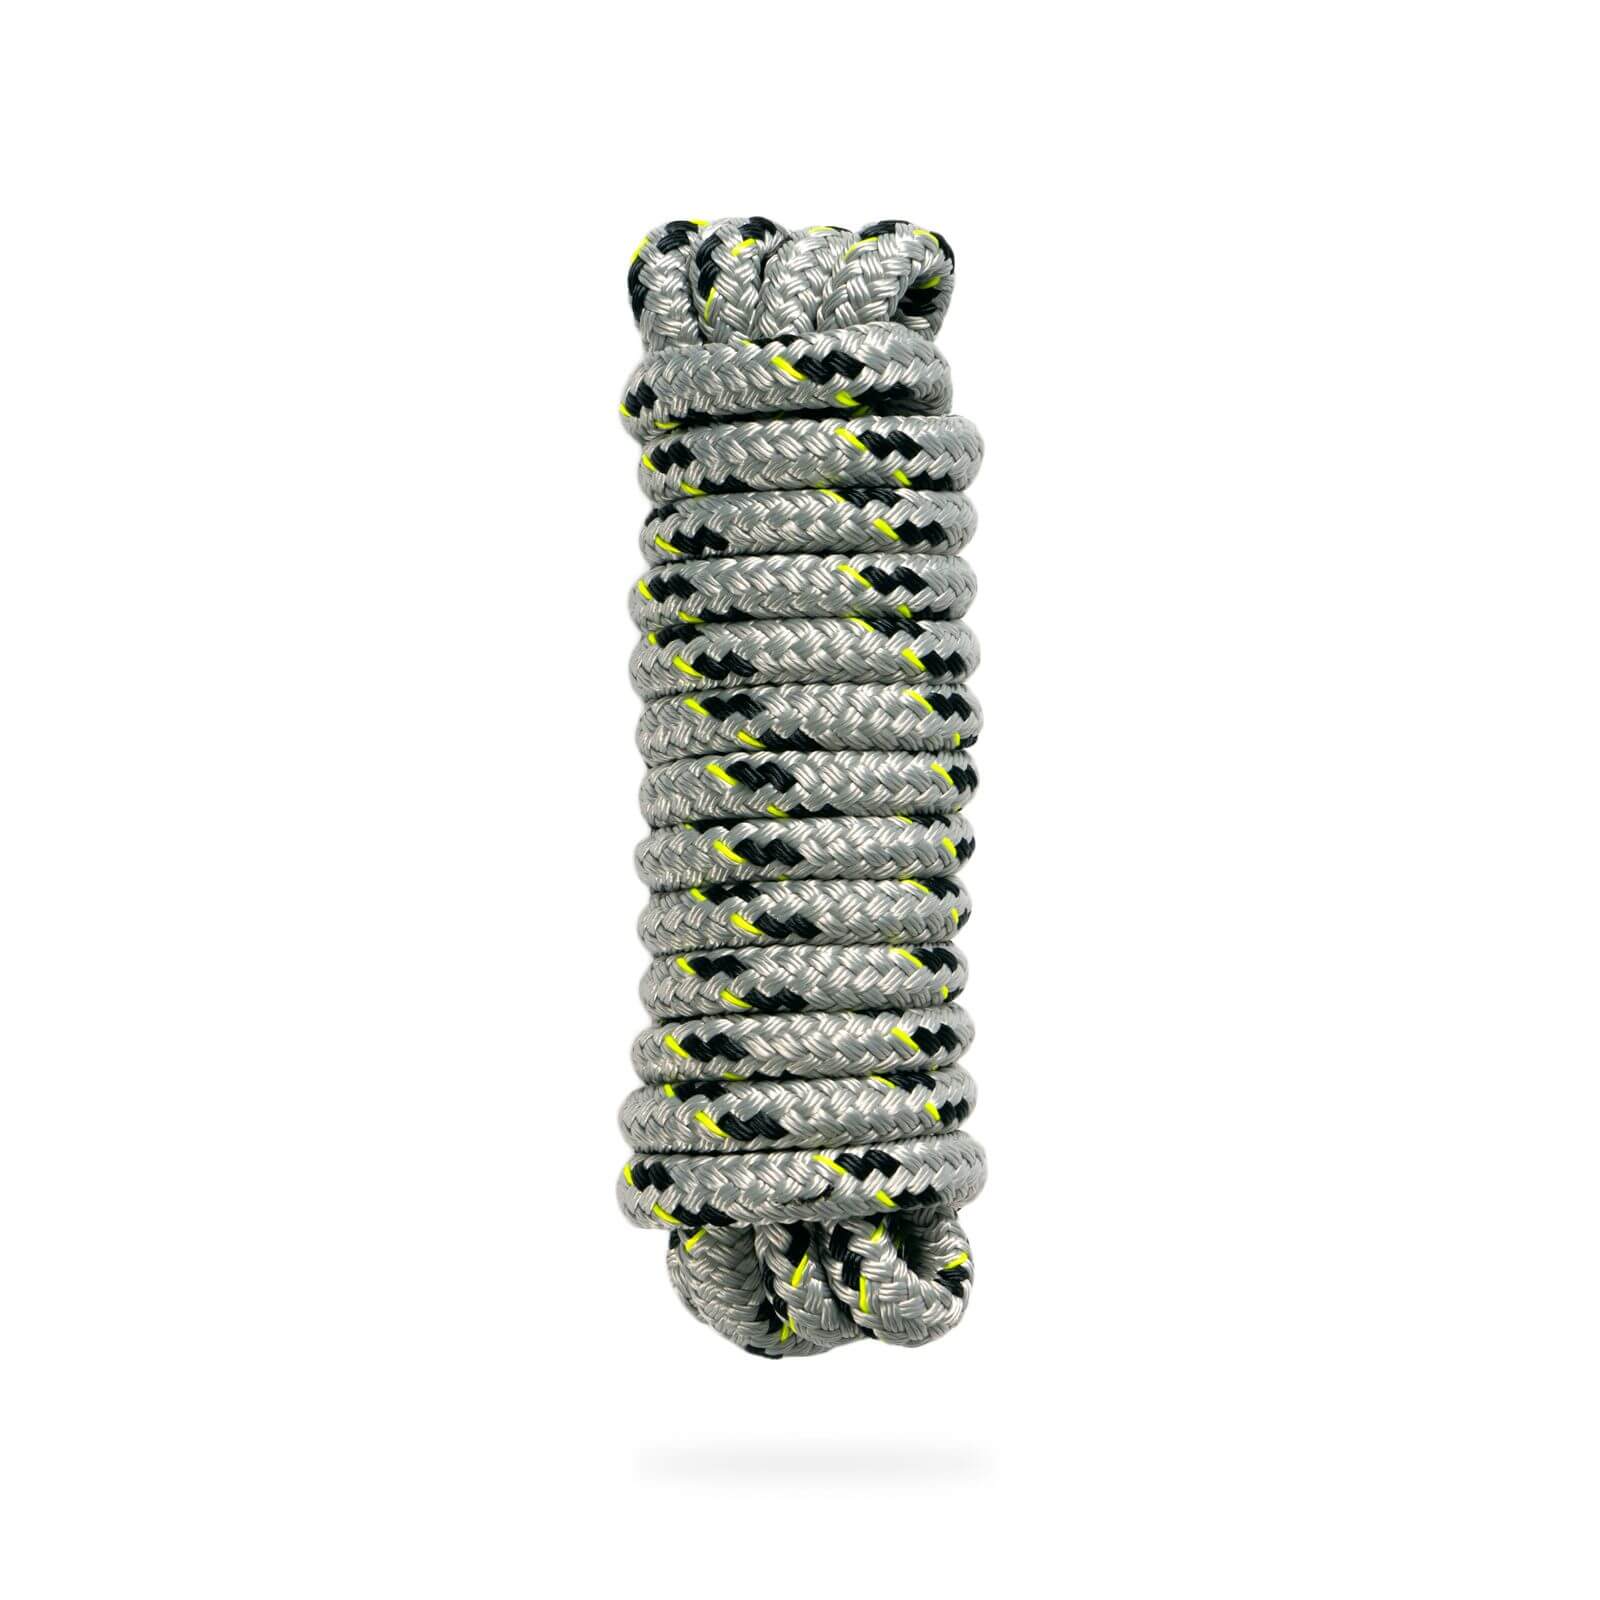 A MISSION double braided grey and yellow rope on a white background.